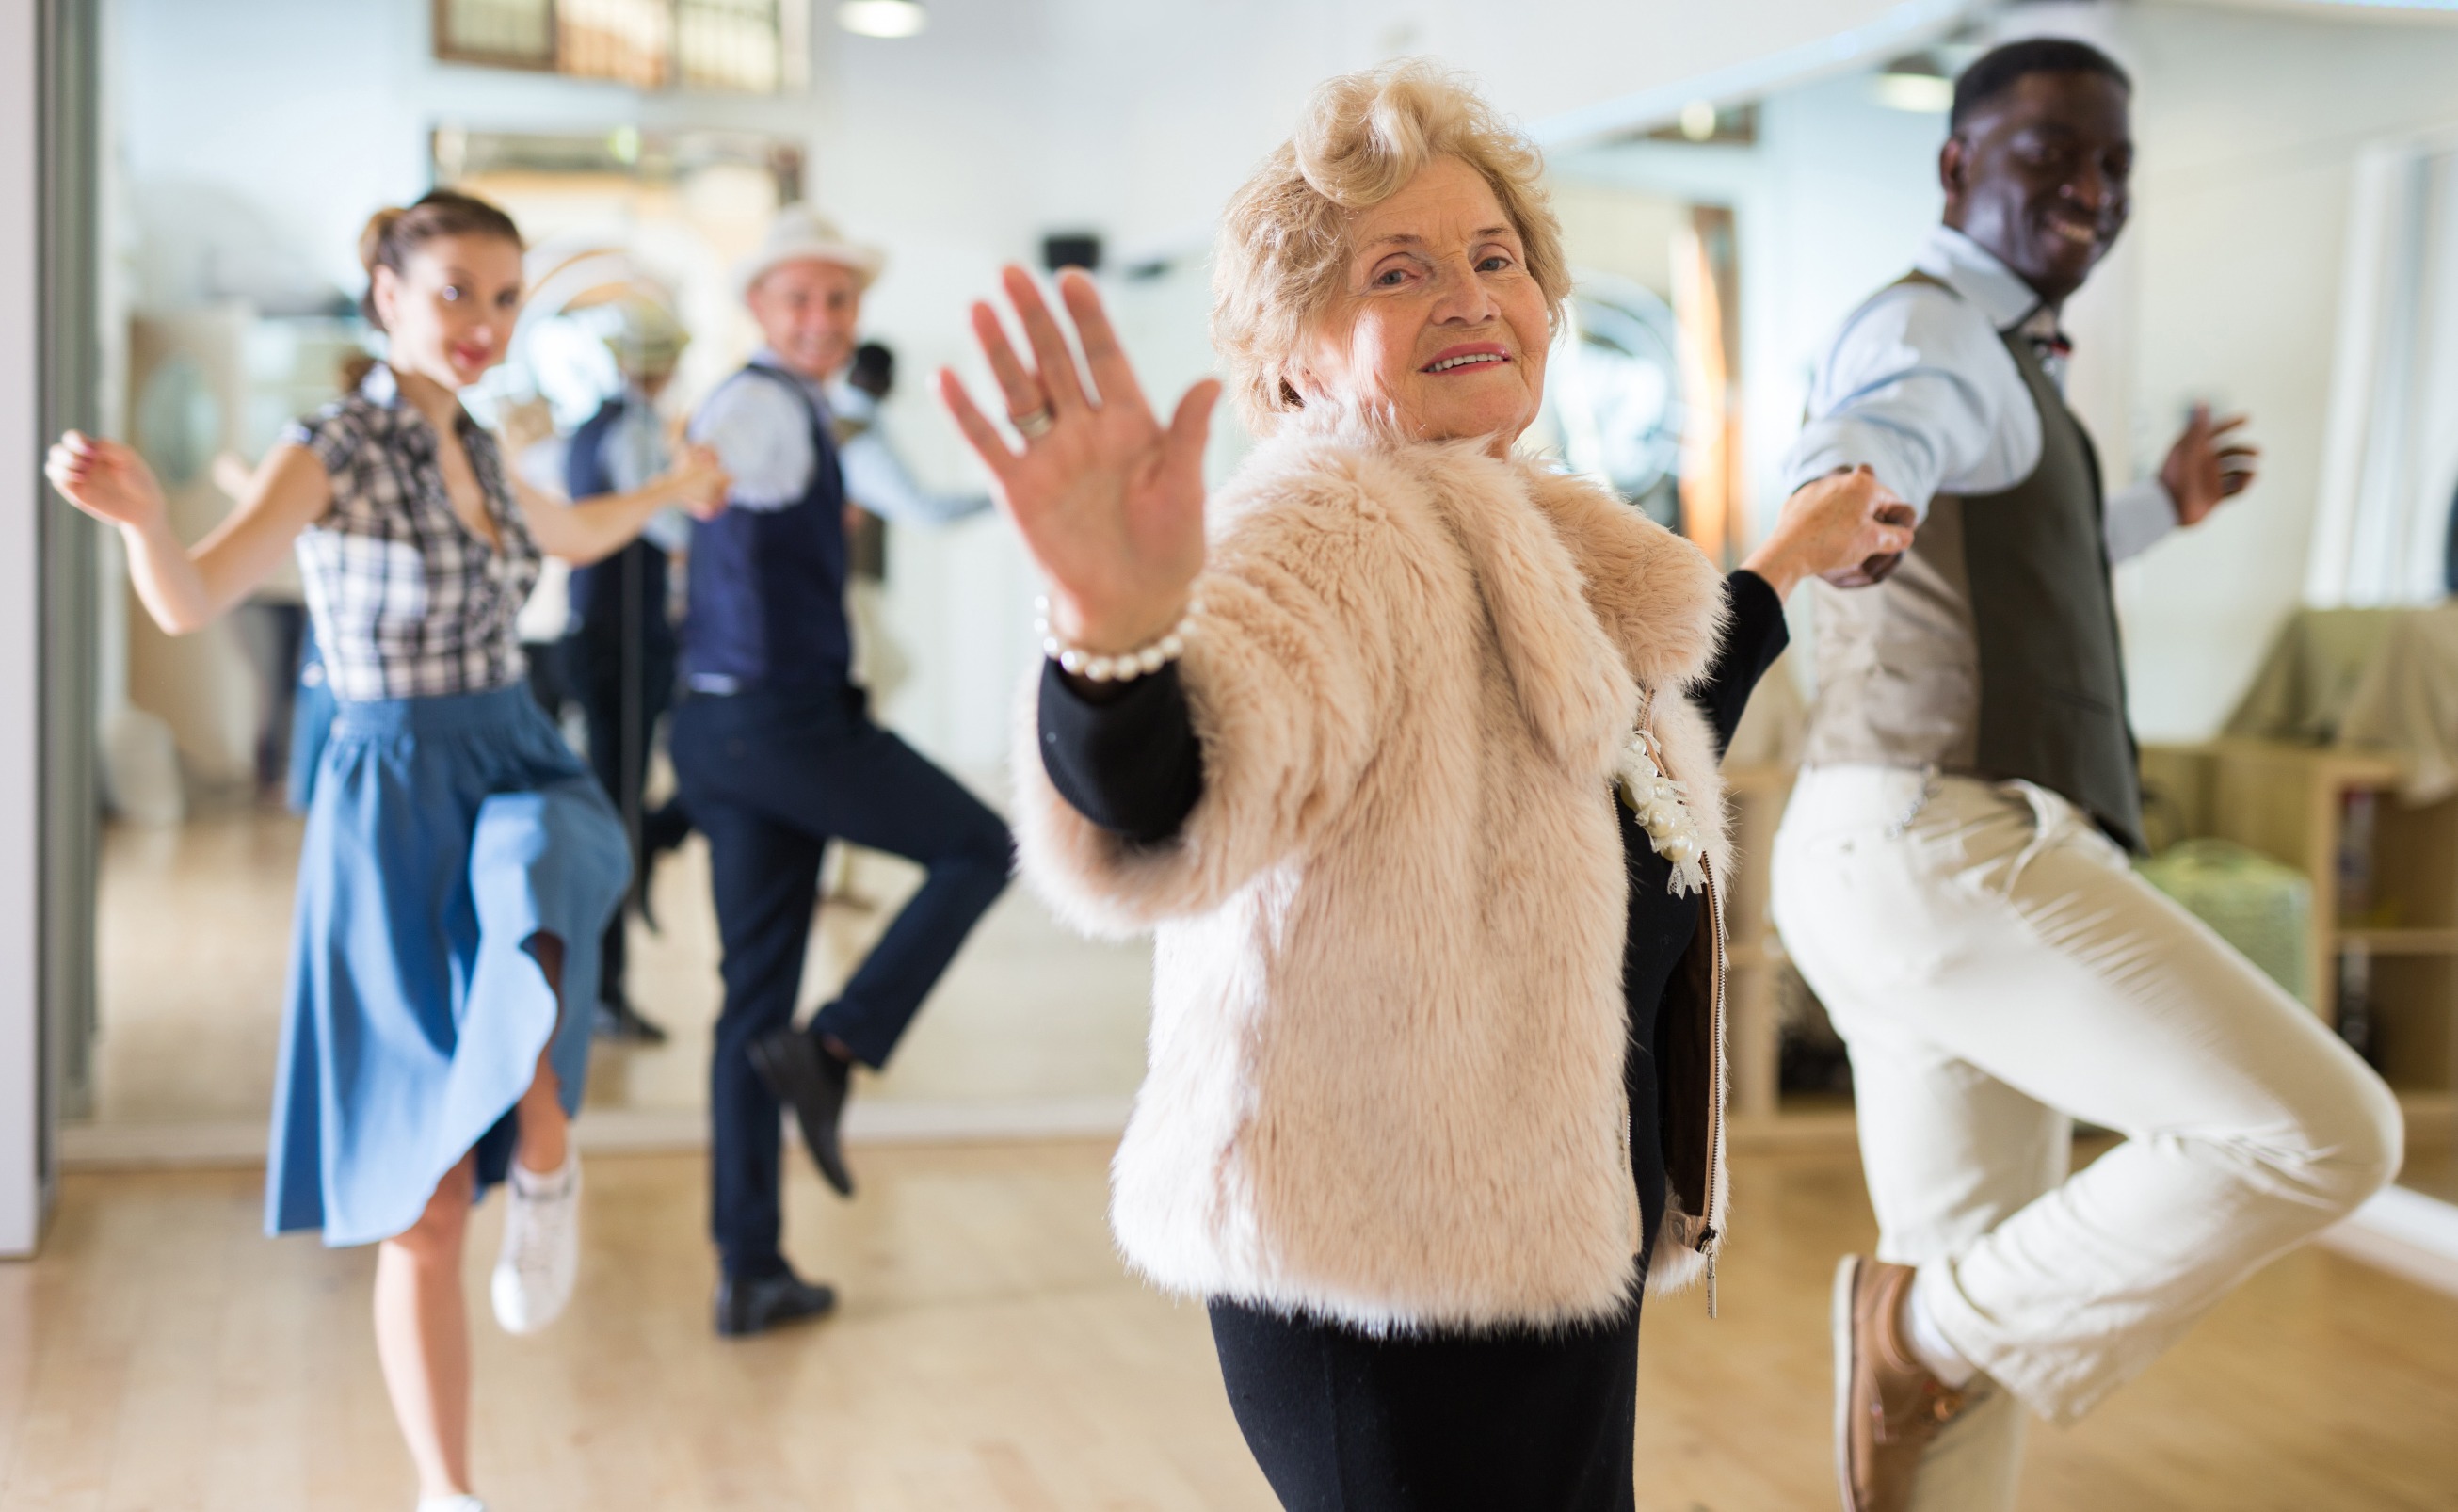 Get Your Senior Moving More in the New Year